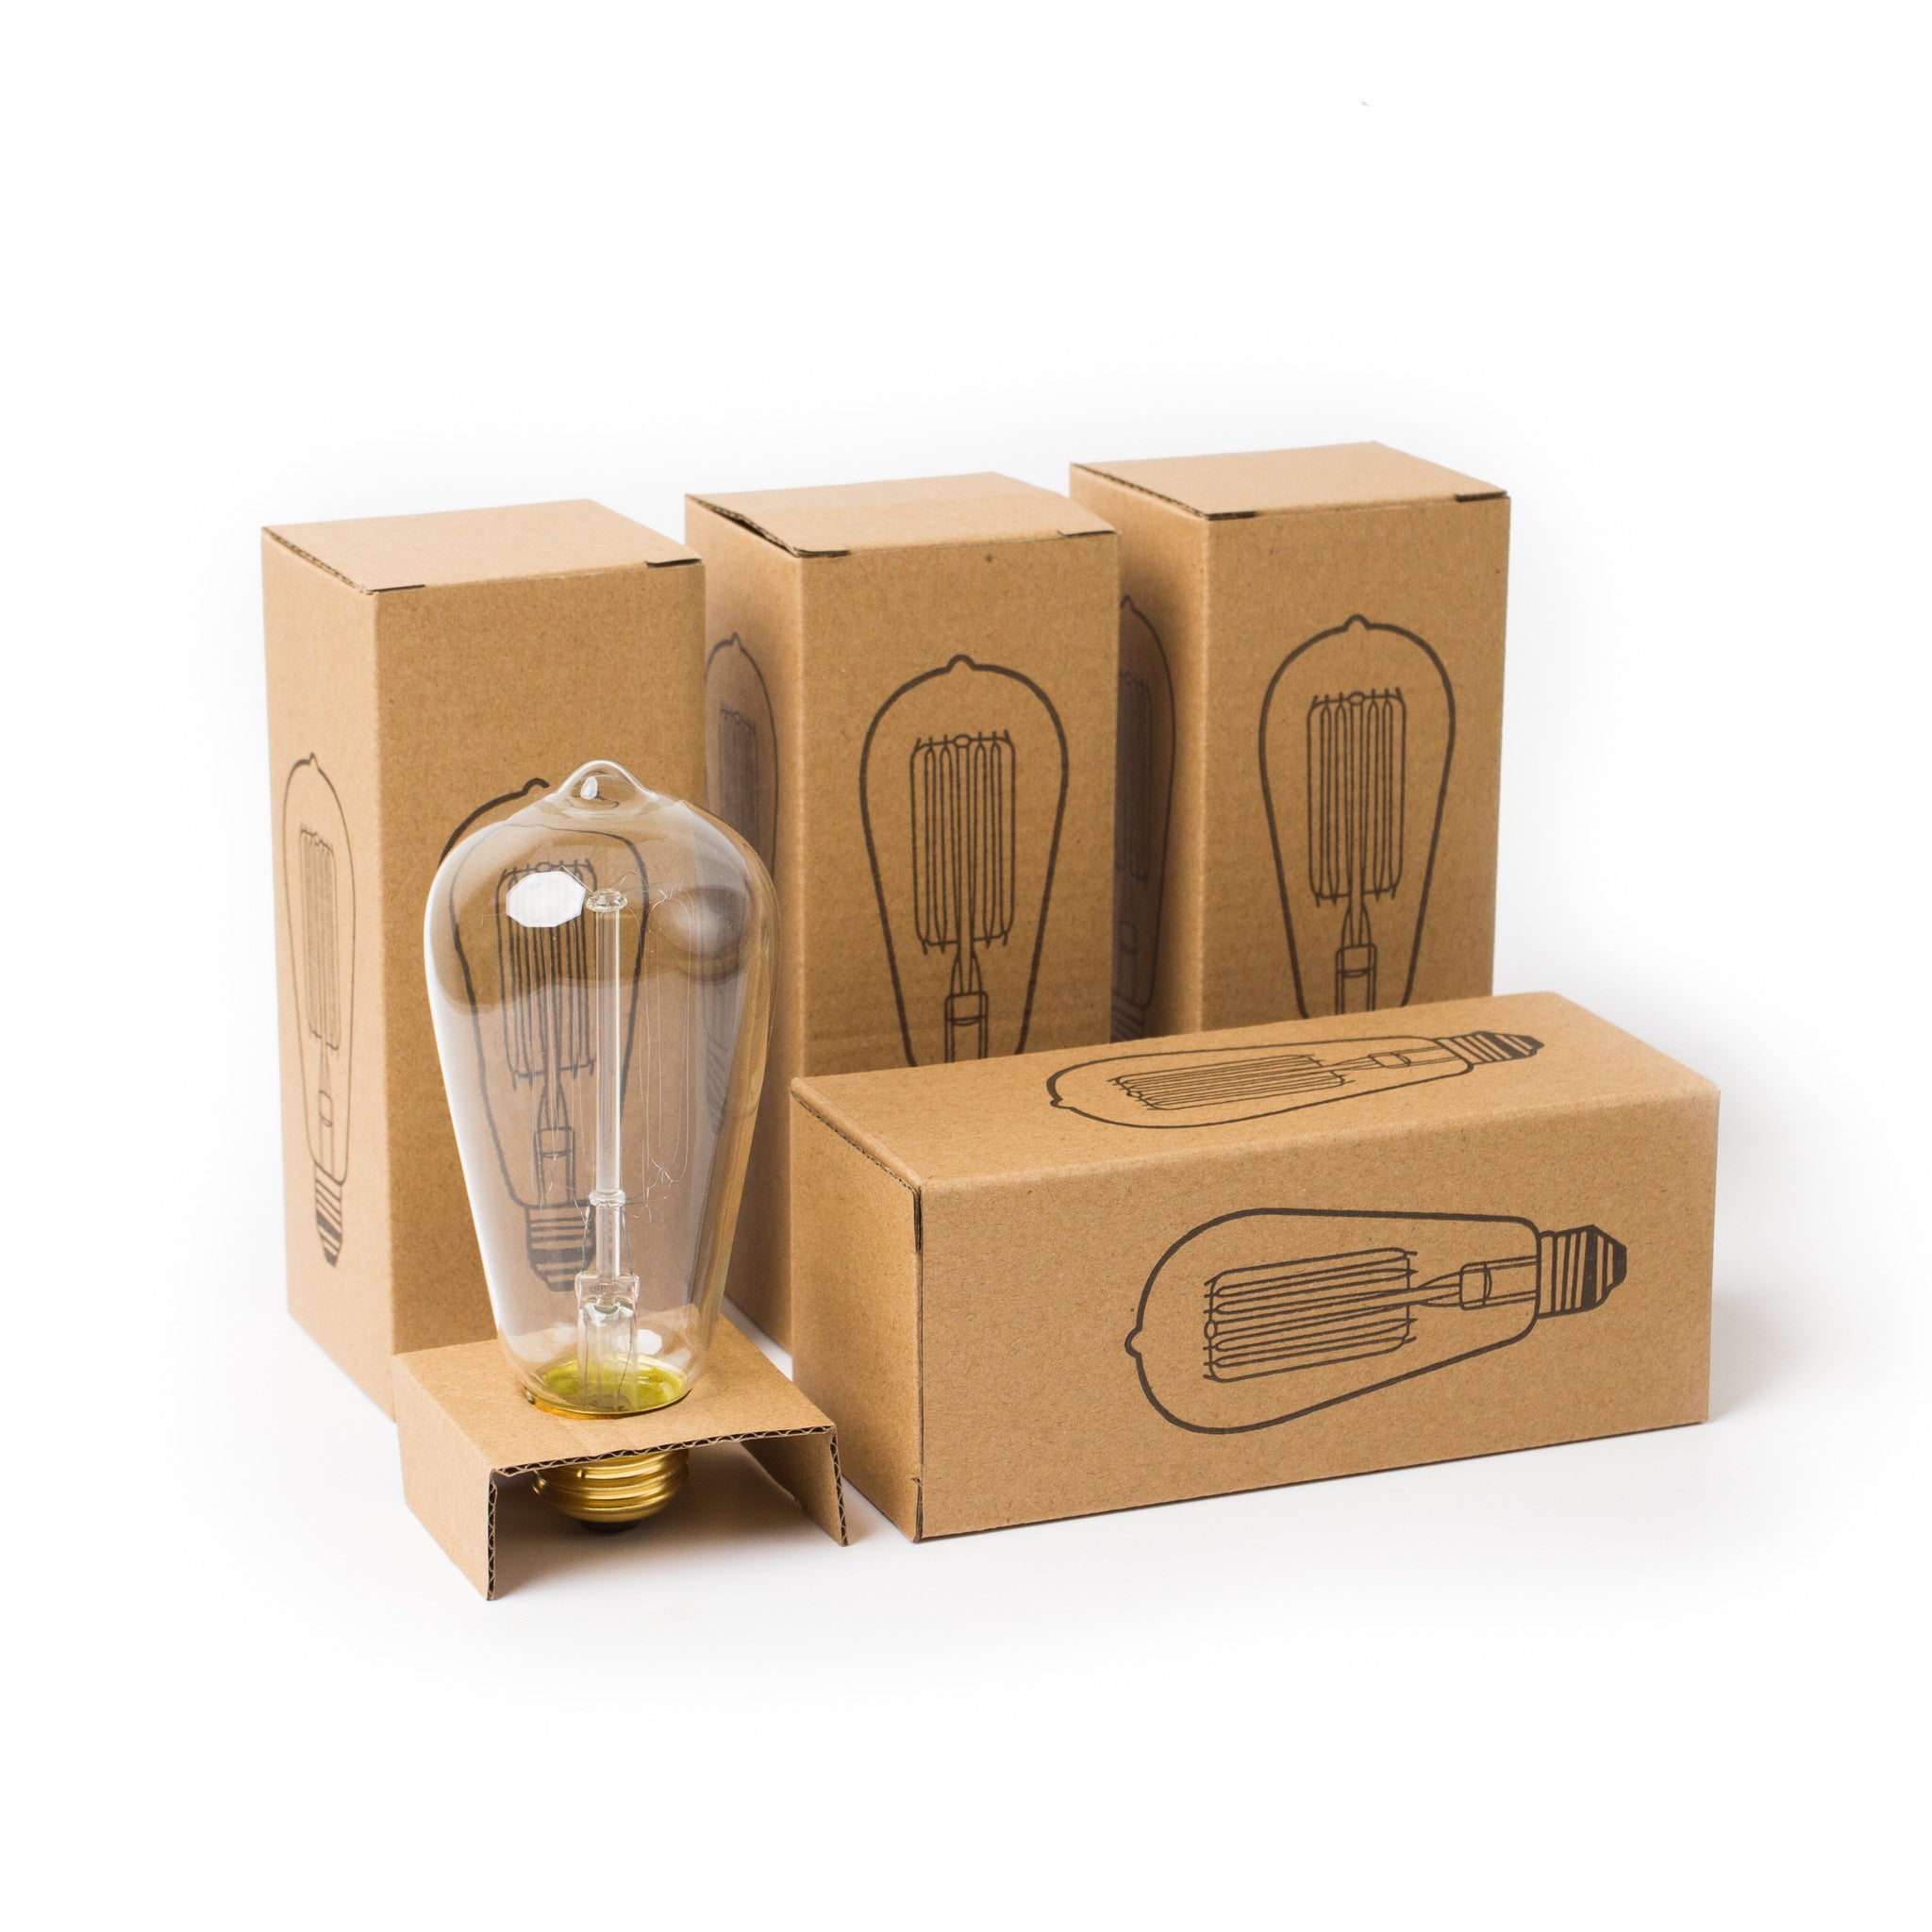 Brillante™ Edison Bulb Pack of 4 - 60W Vintage Style Incandescent Bulbs